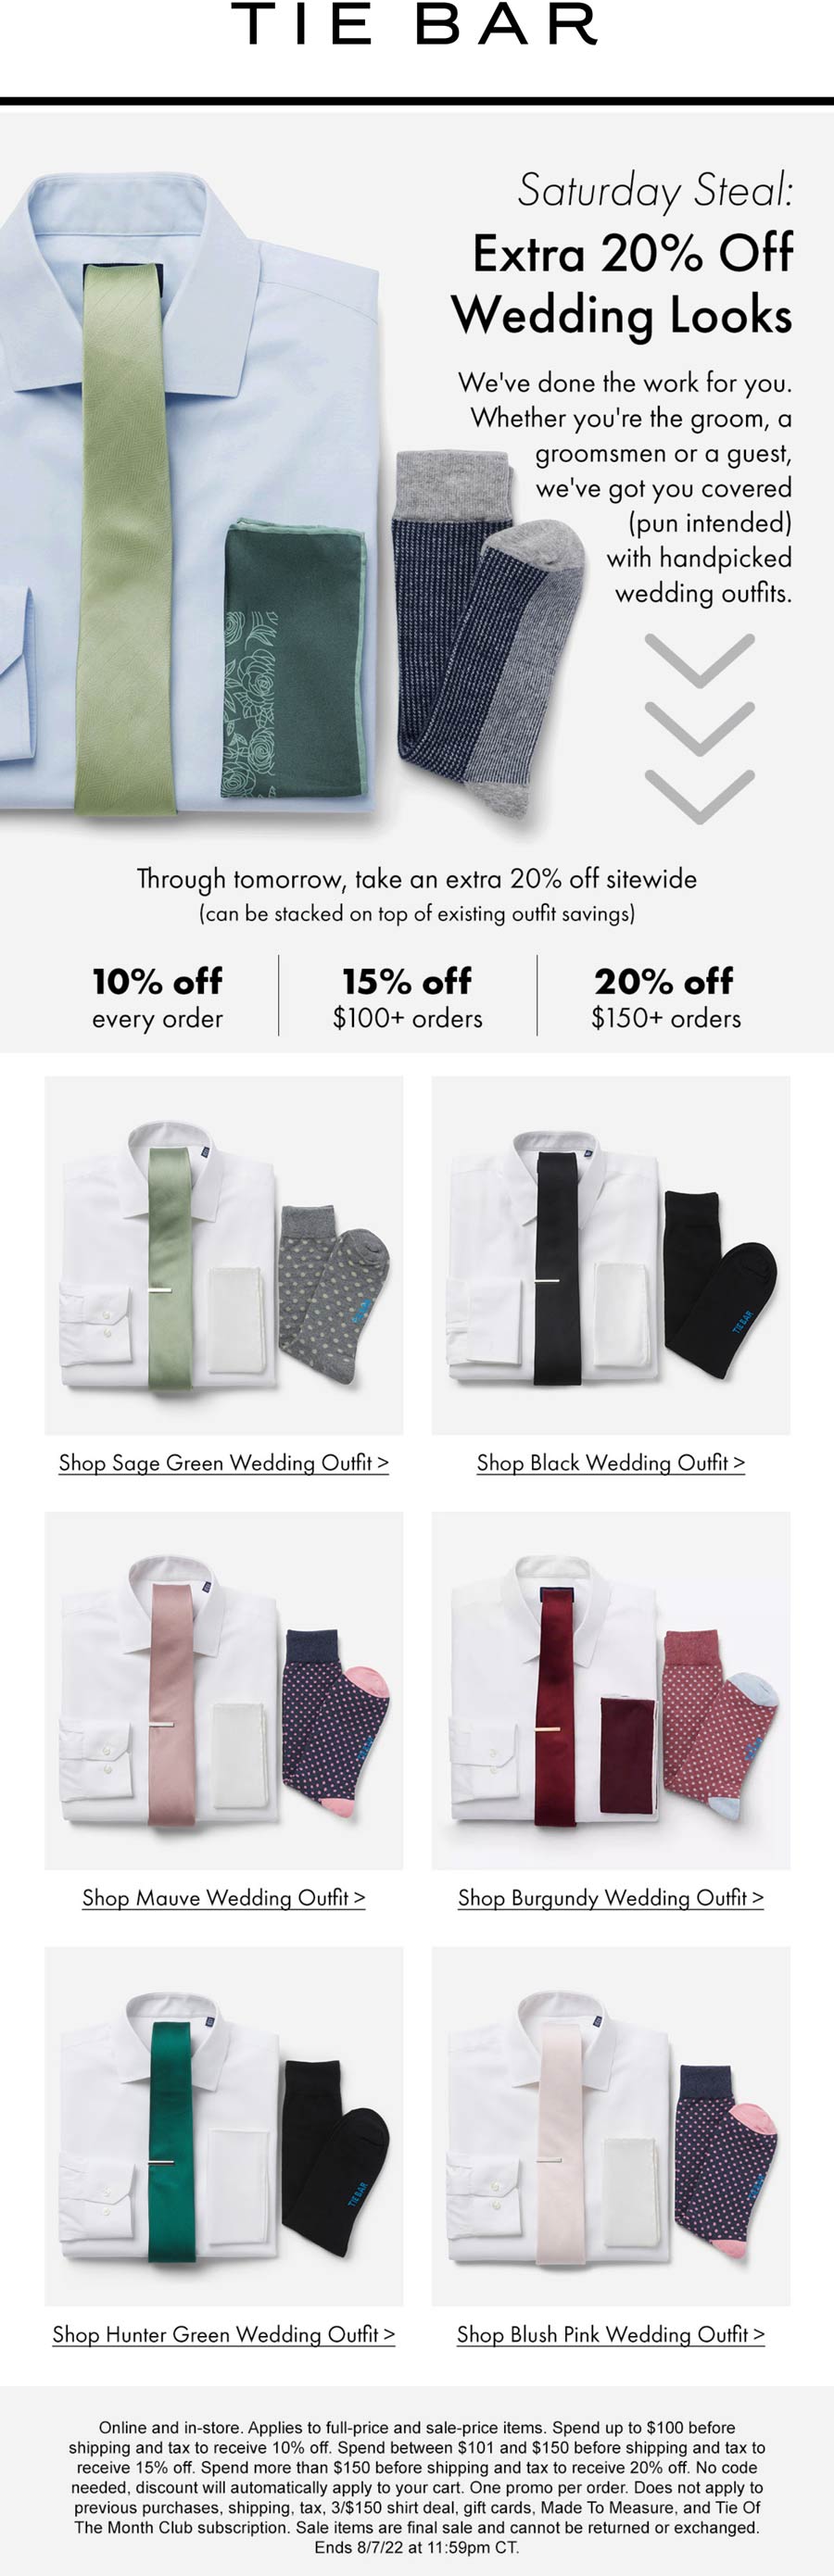 Tie Bar coupons & promo code for [December 2022]